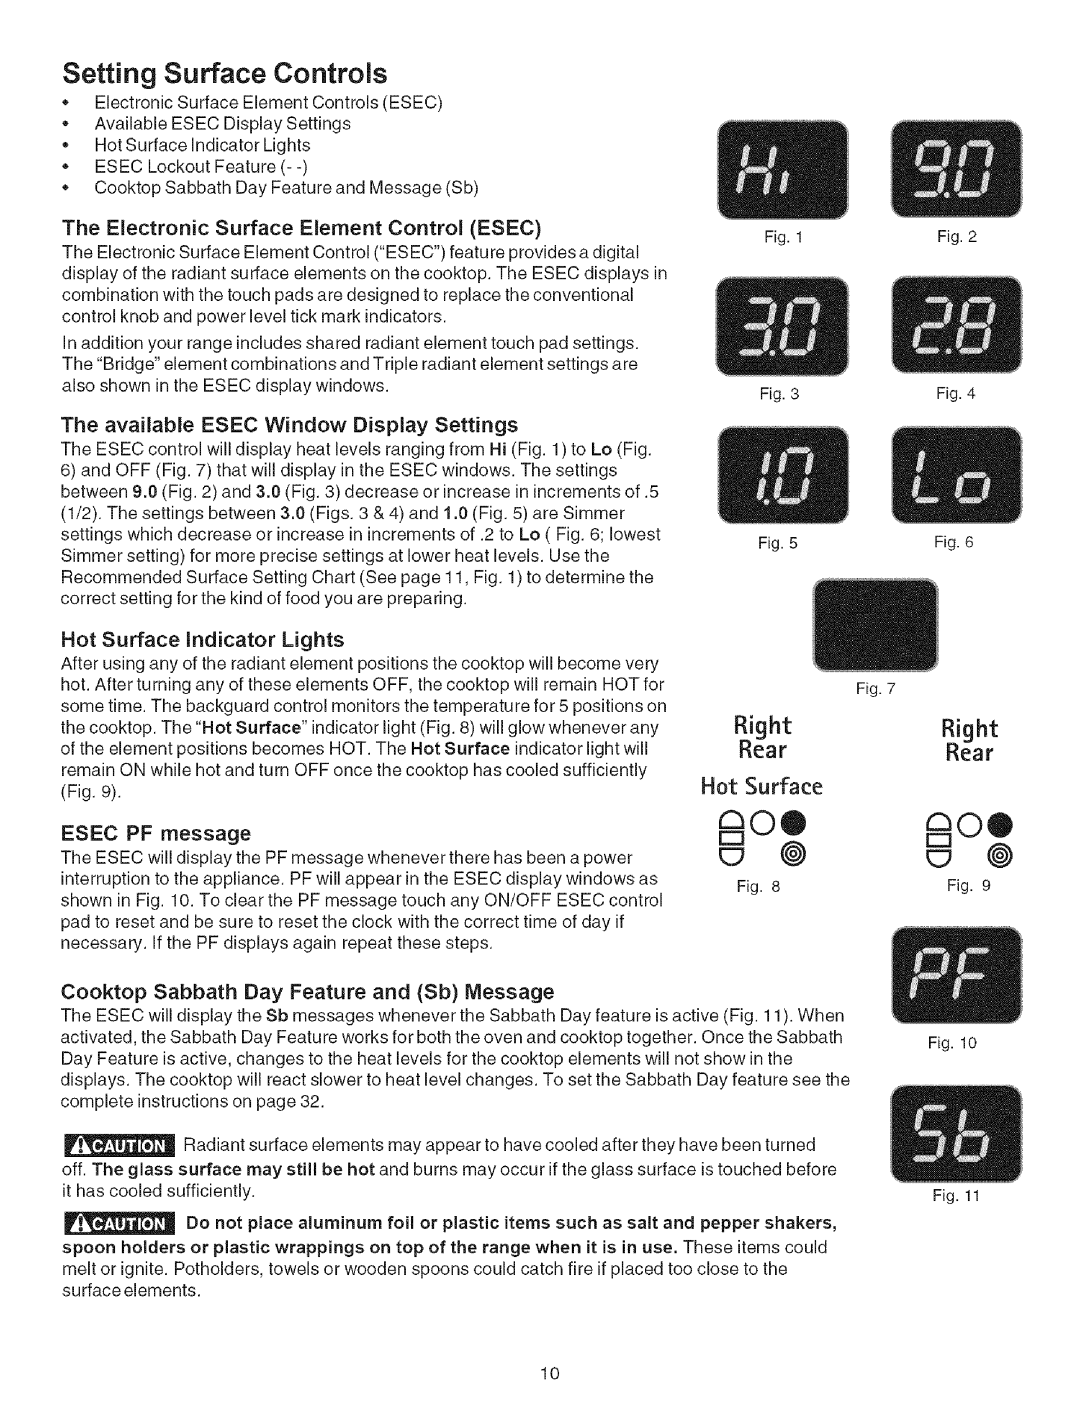 Kenmore 790.9659 manual Setting Surface Controls, Hot Surface, Cooktop Sabbath Day Feature and Sb Message 